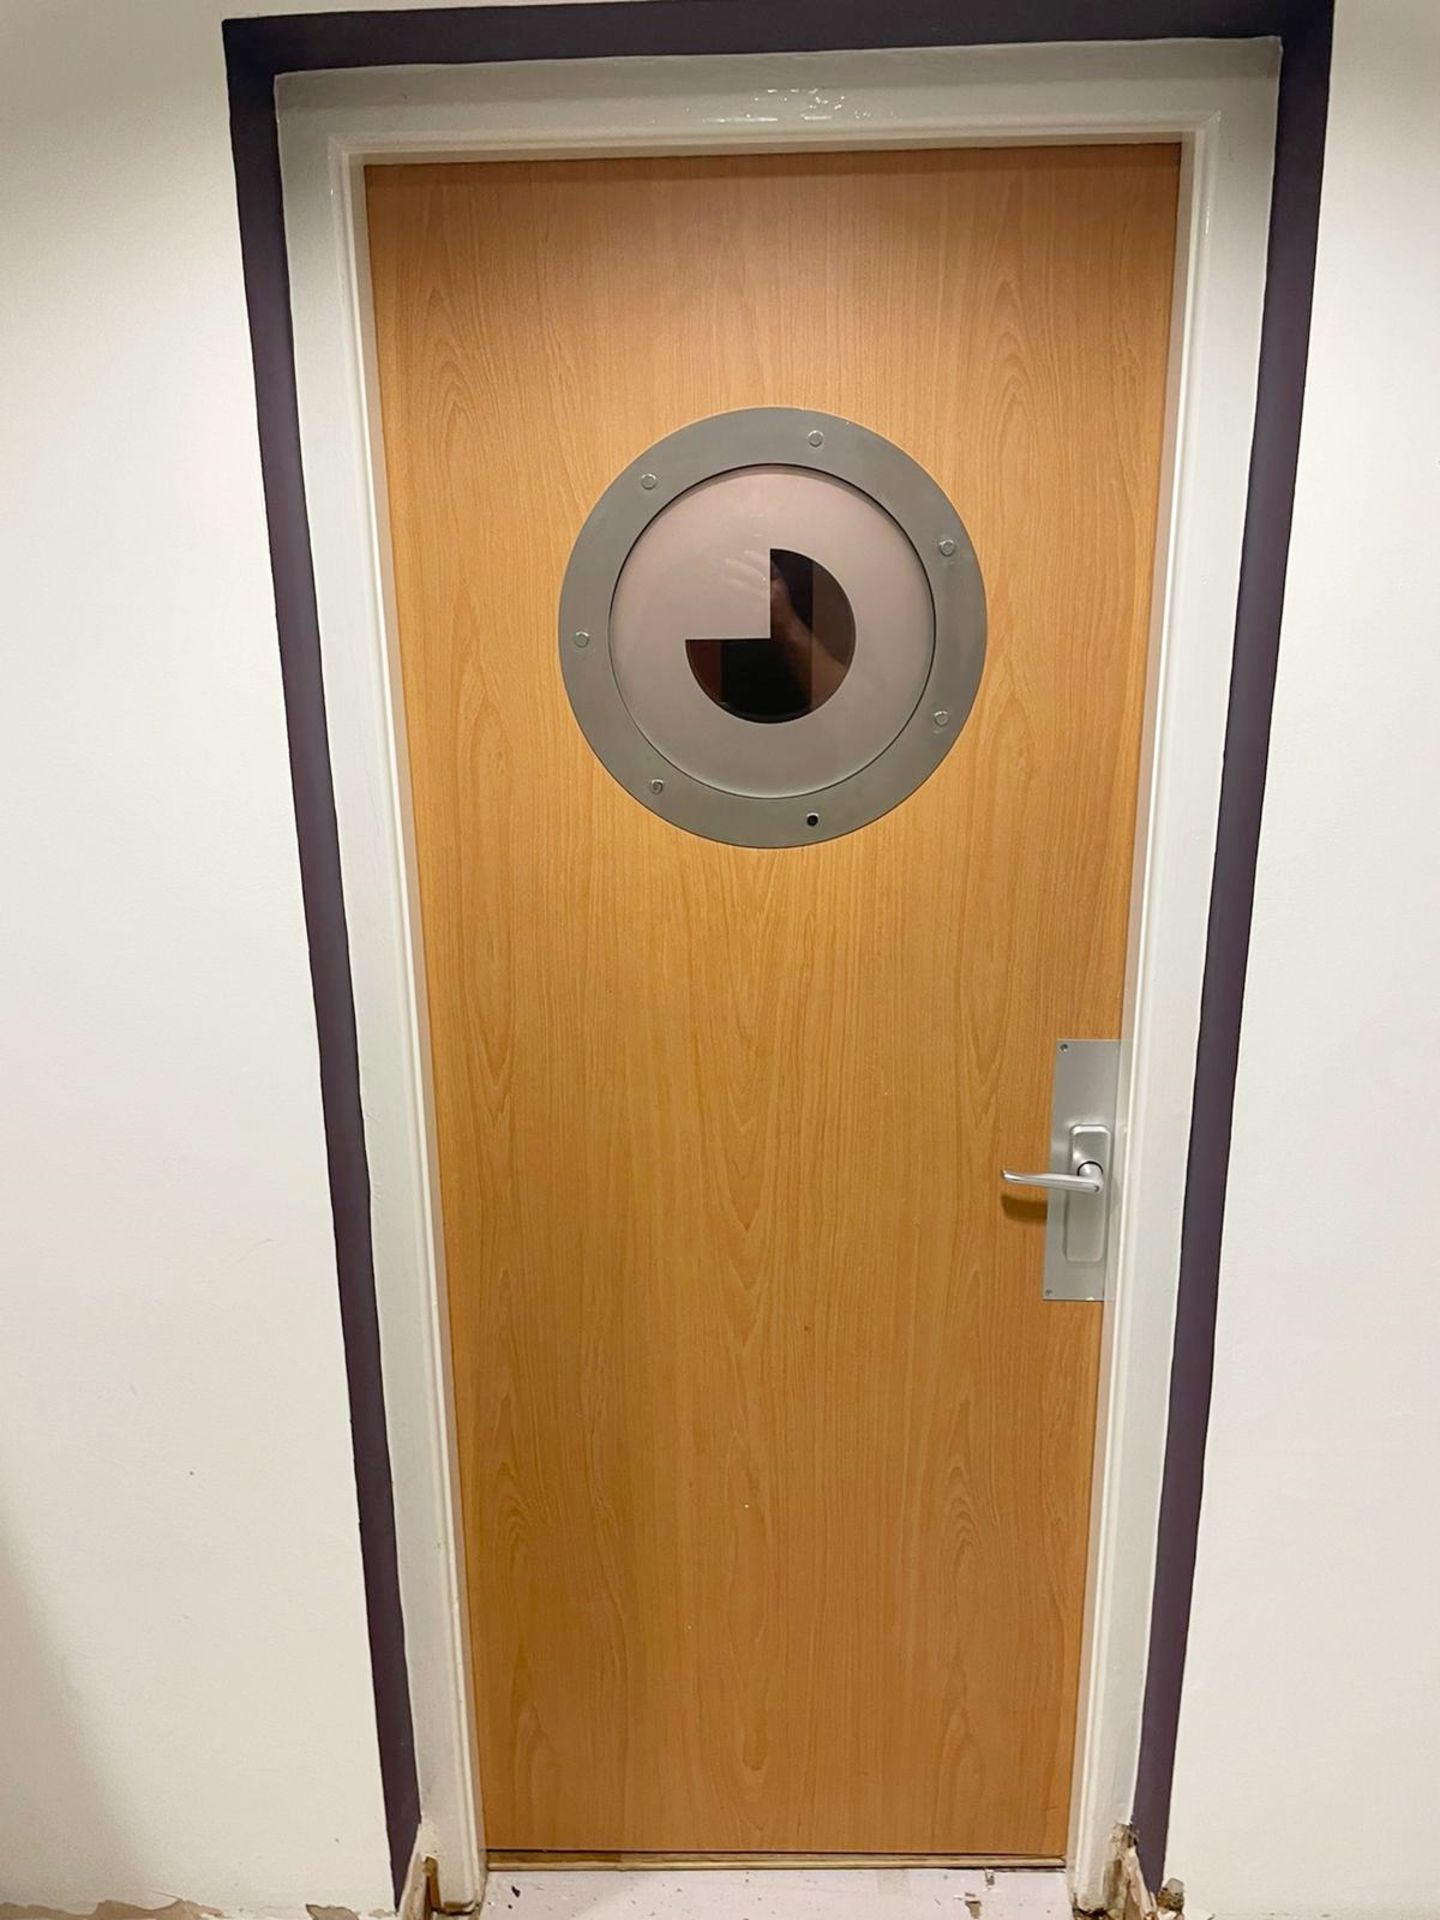 1 x Office Wooden Door With Circular Glass Window 190(H) x 76(W)  - To Be Removed From An